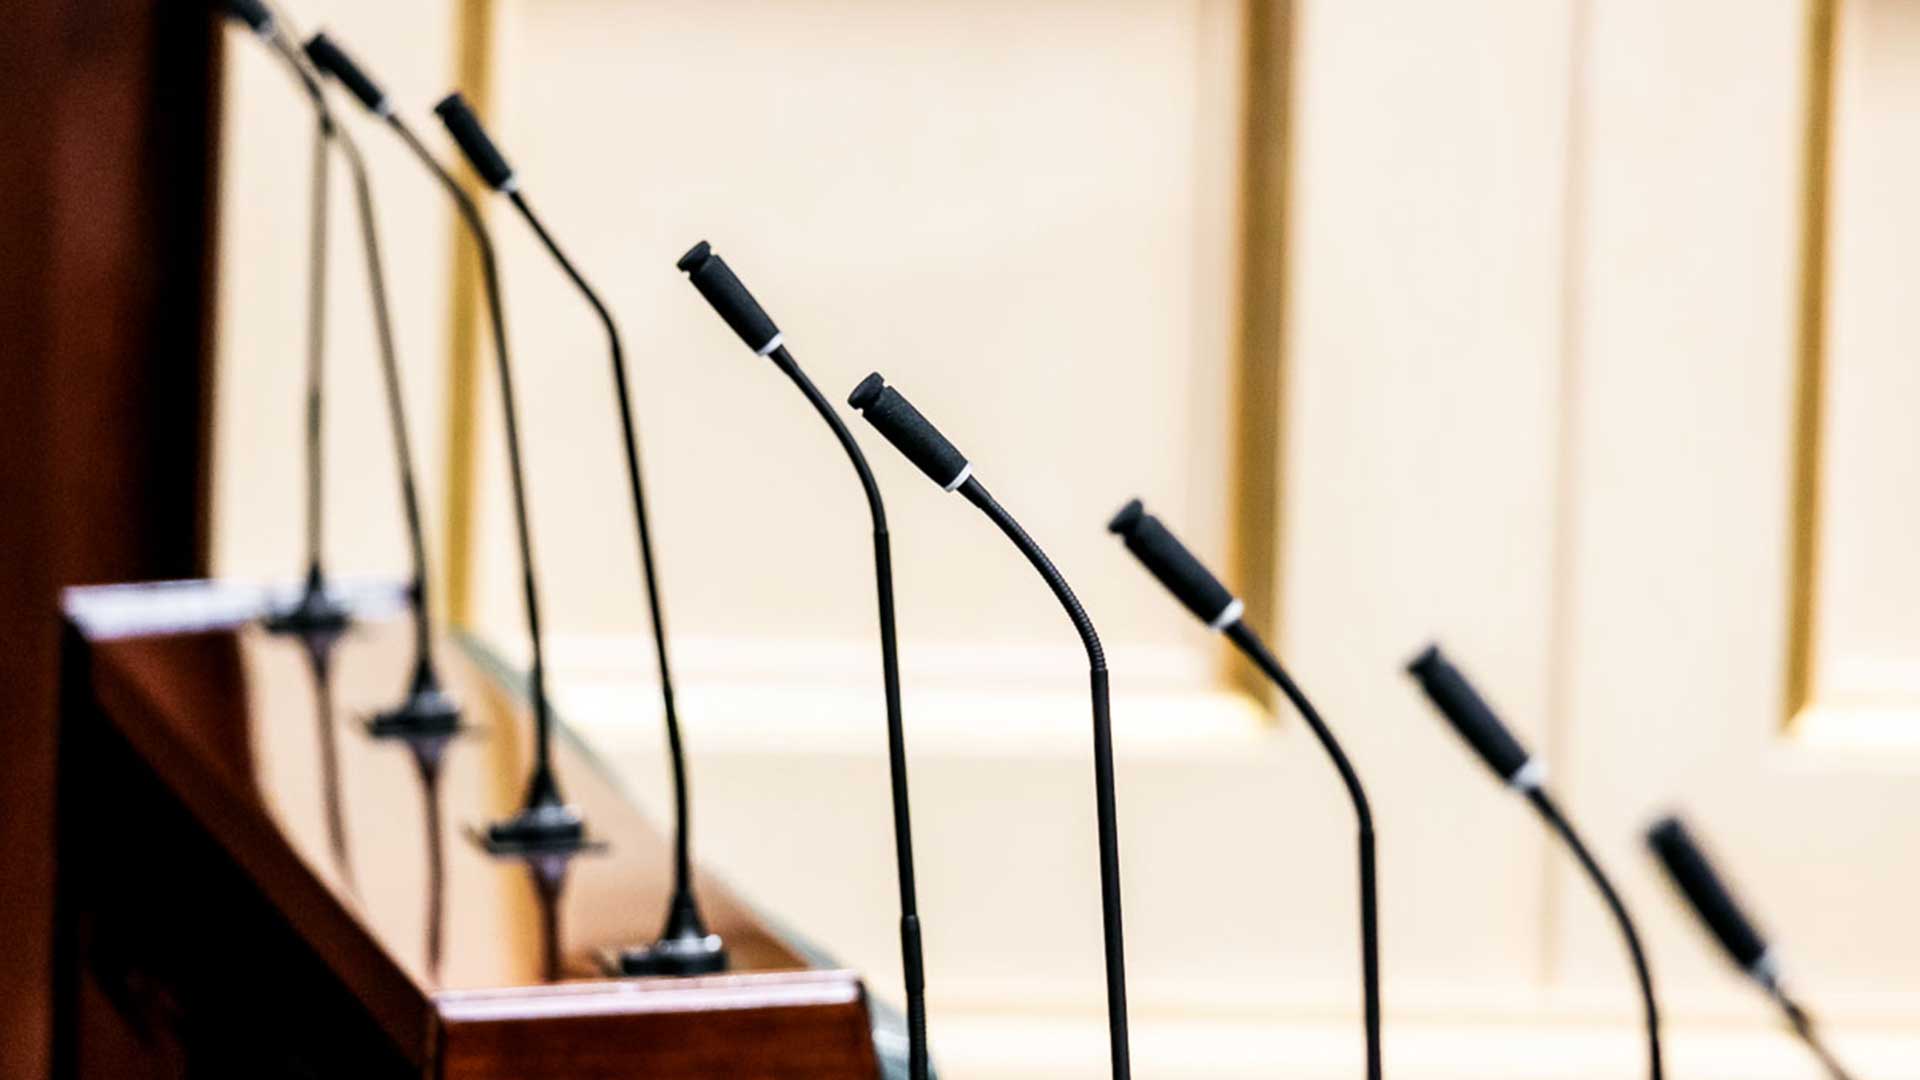 Row of microphones in Parliament chamber